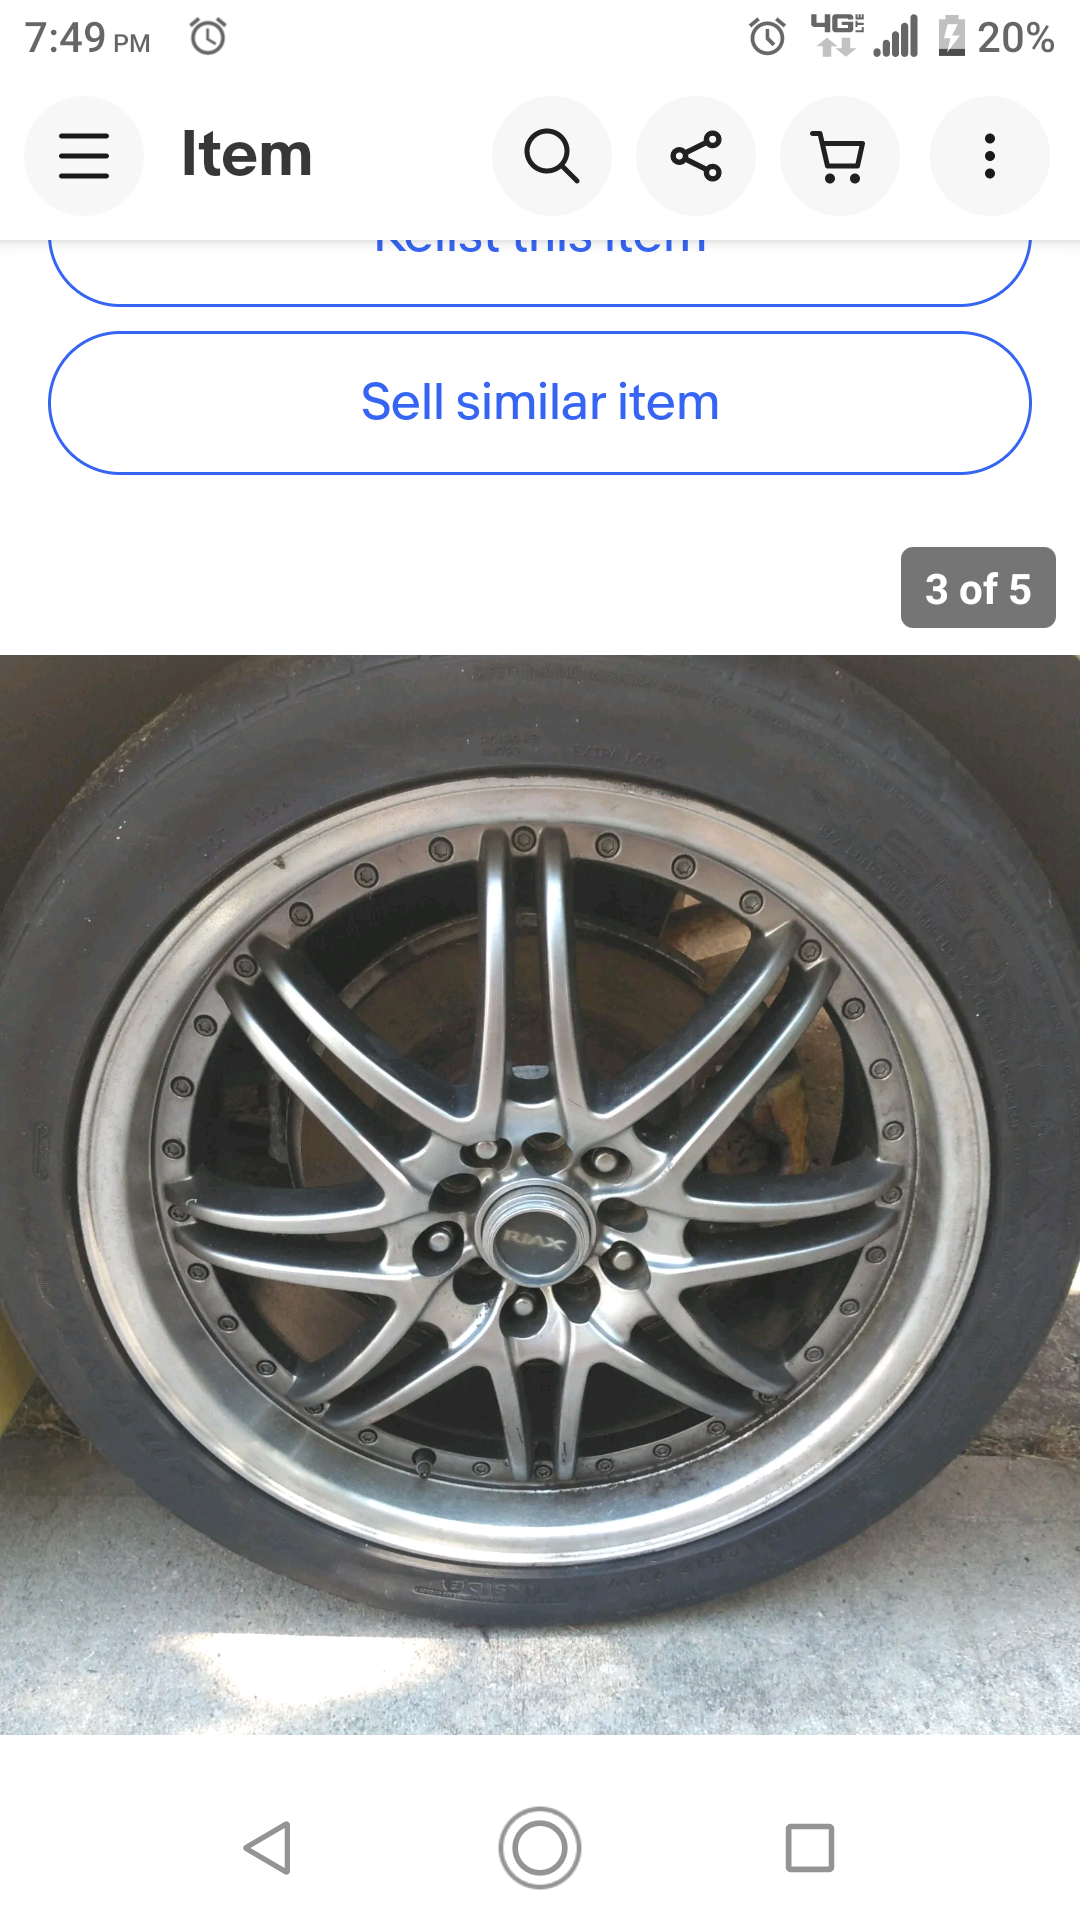 Wheels and Tires/Axles - 18 inch wheels - Used - Woodhaven, NY 11421, United States